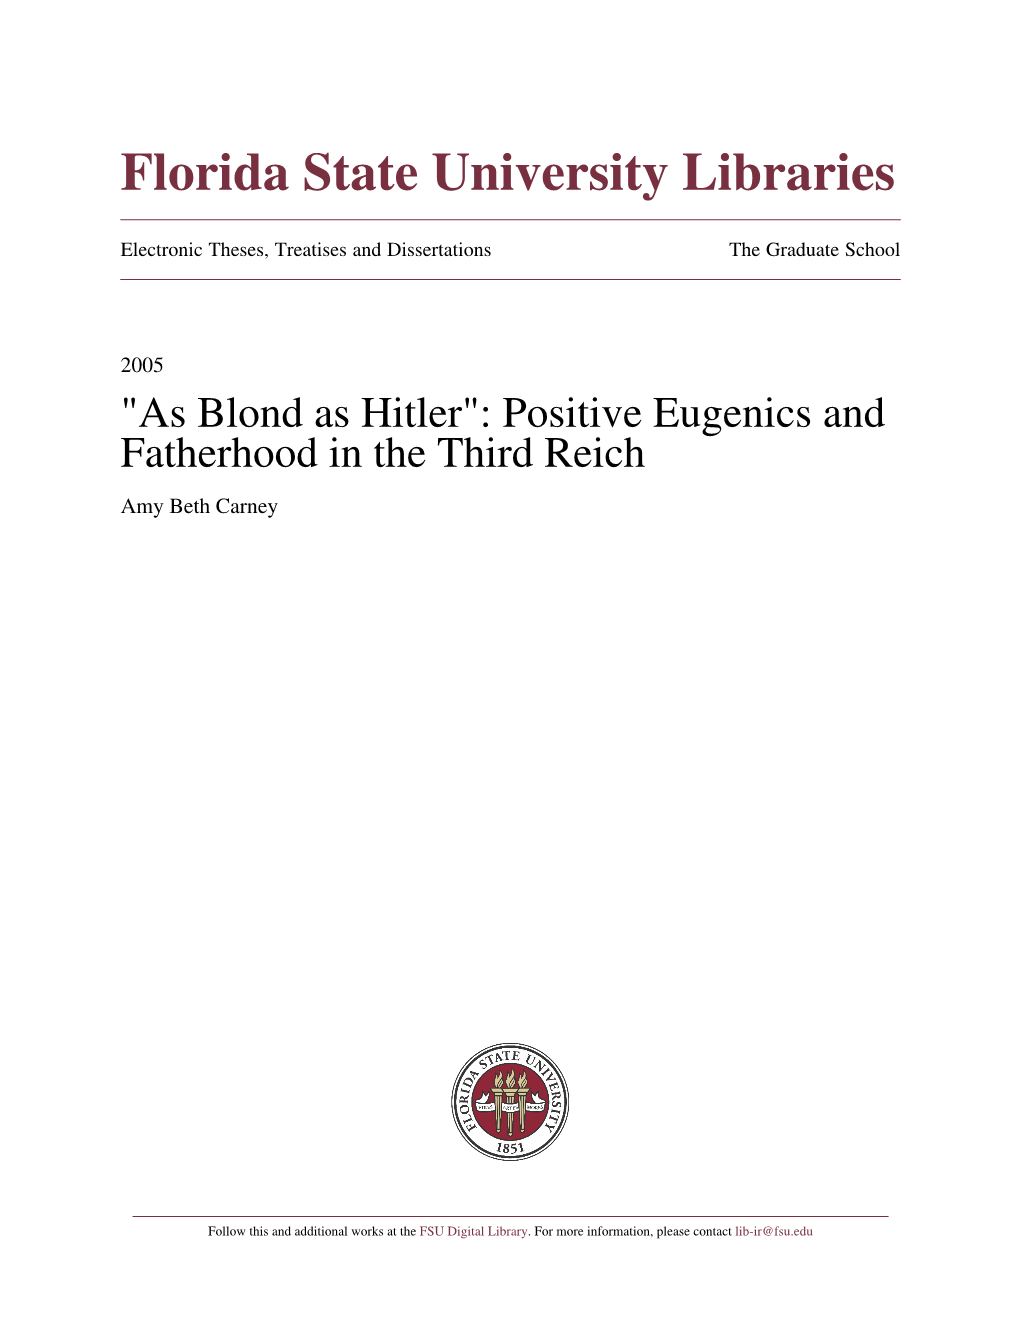 "As Blond As Hitler": Positive Eugenics and Fatherhood in the Third Reich Amy Beth Carney